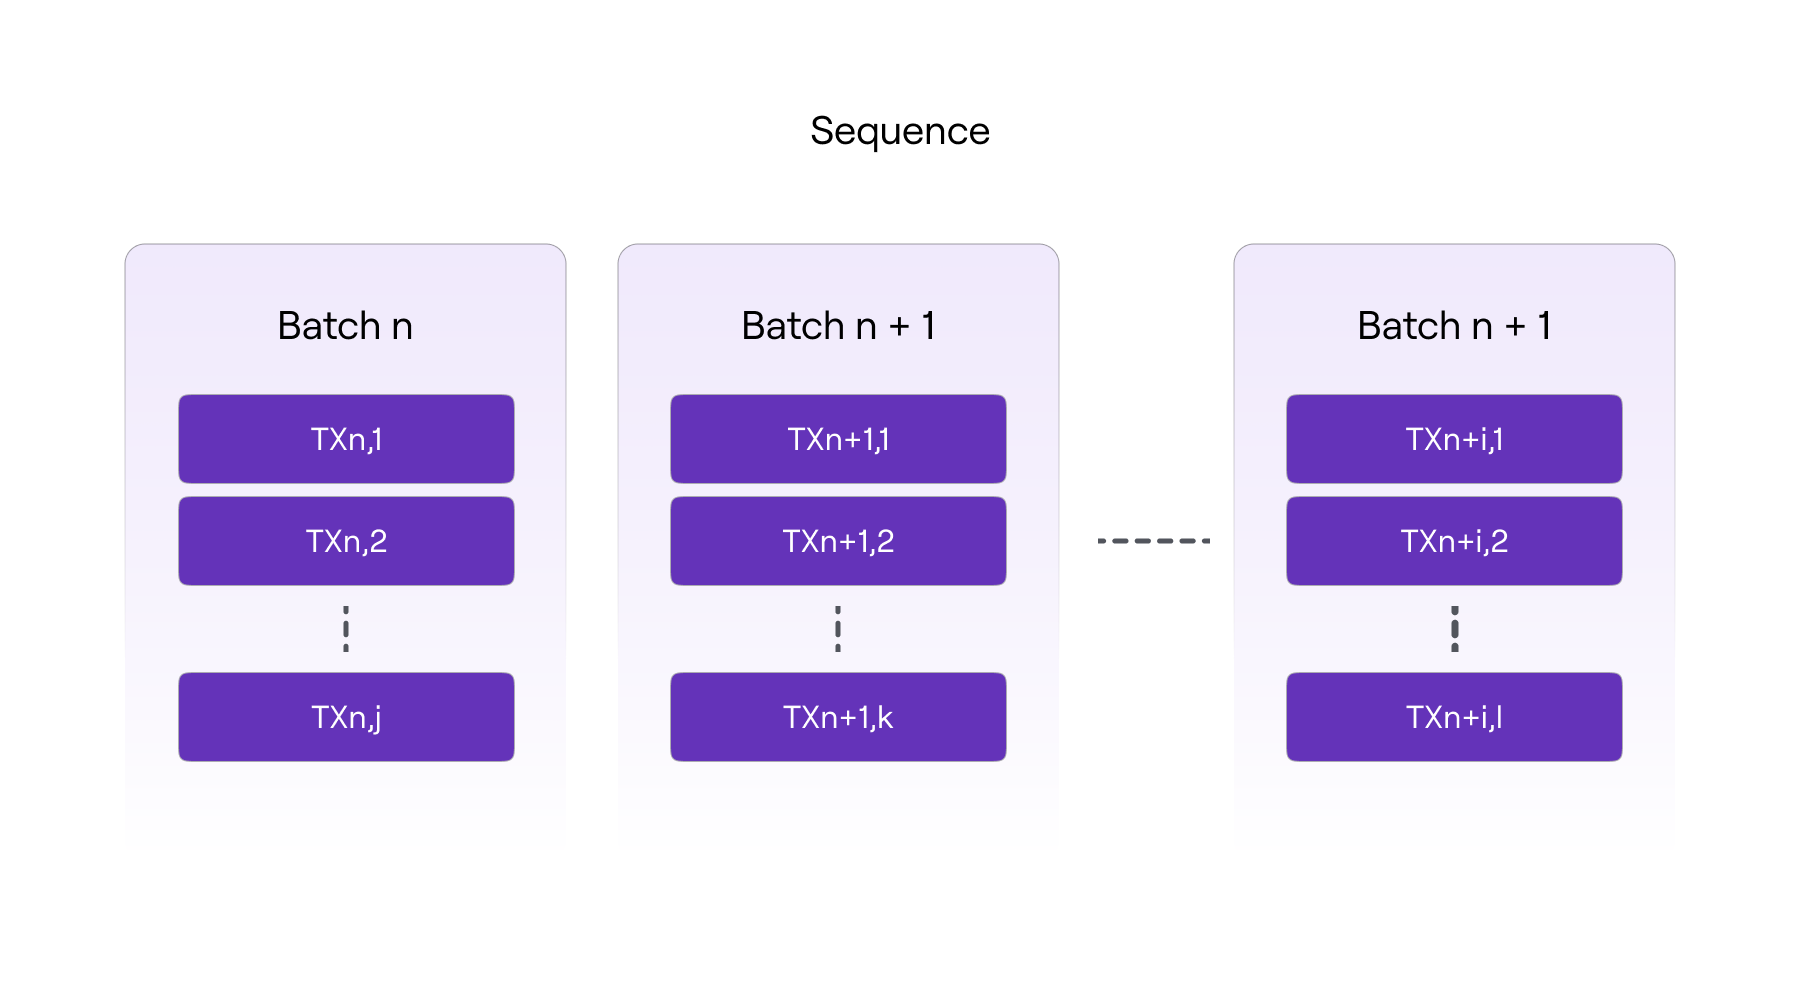 An outline of sequenced batches